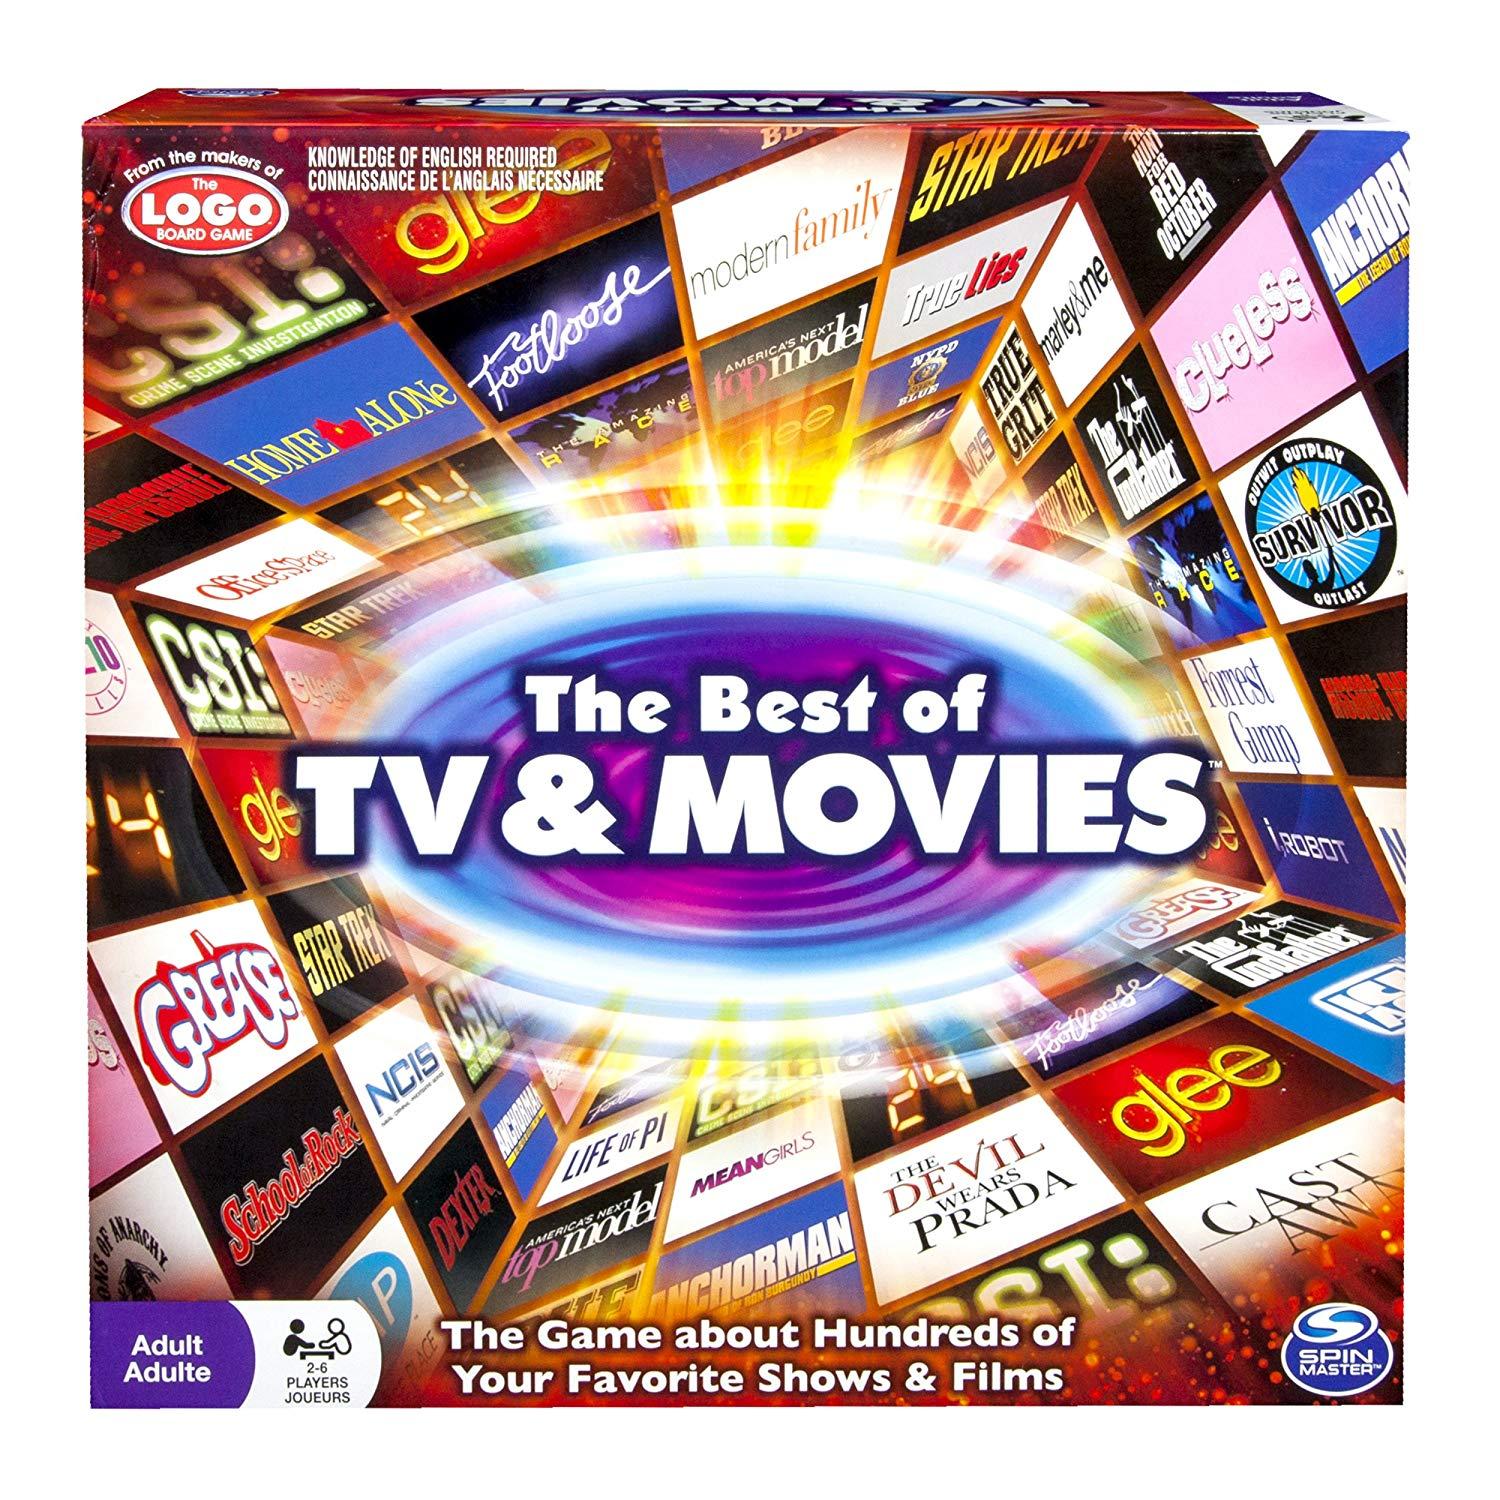 TV and Movie Logo - Amazon.com: Spin Master Games: Best of TV and Movies Board Game ...